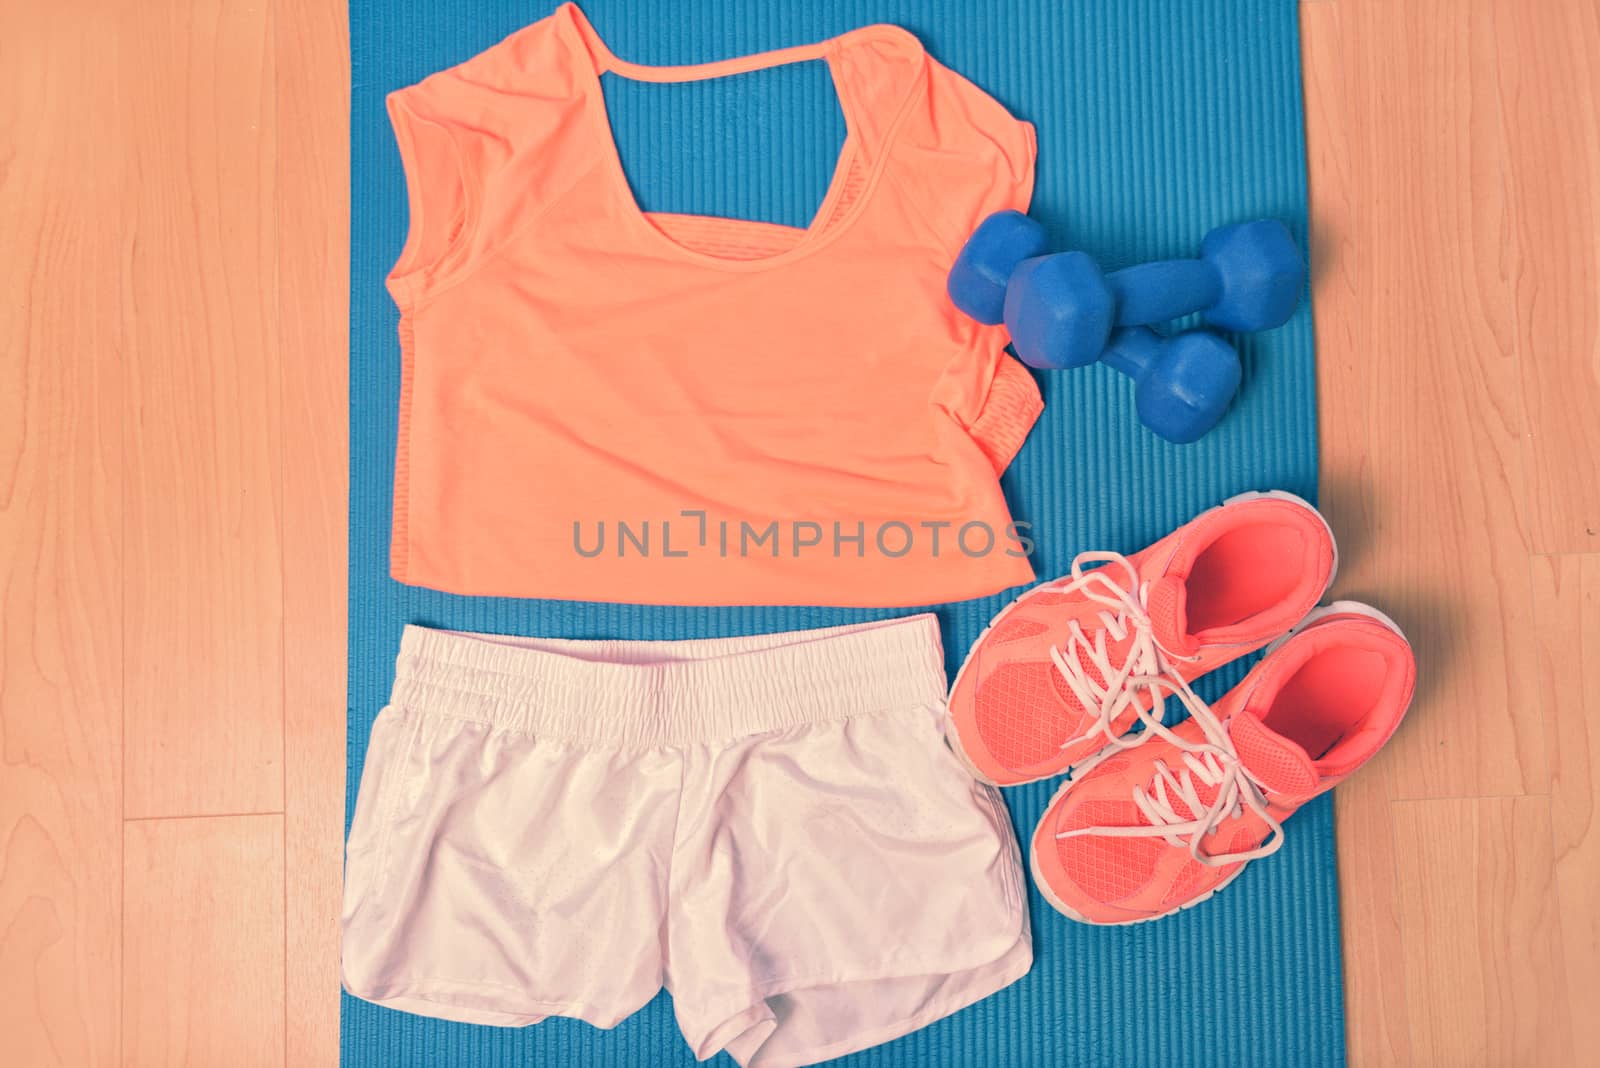 Workout clothes - fitness outfit and running shoes. Overhead of clothing ready for lifting weights at the gym or at home, laying on a yoga mat on the floor. Matching orange t-shirt and sneakers.